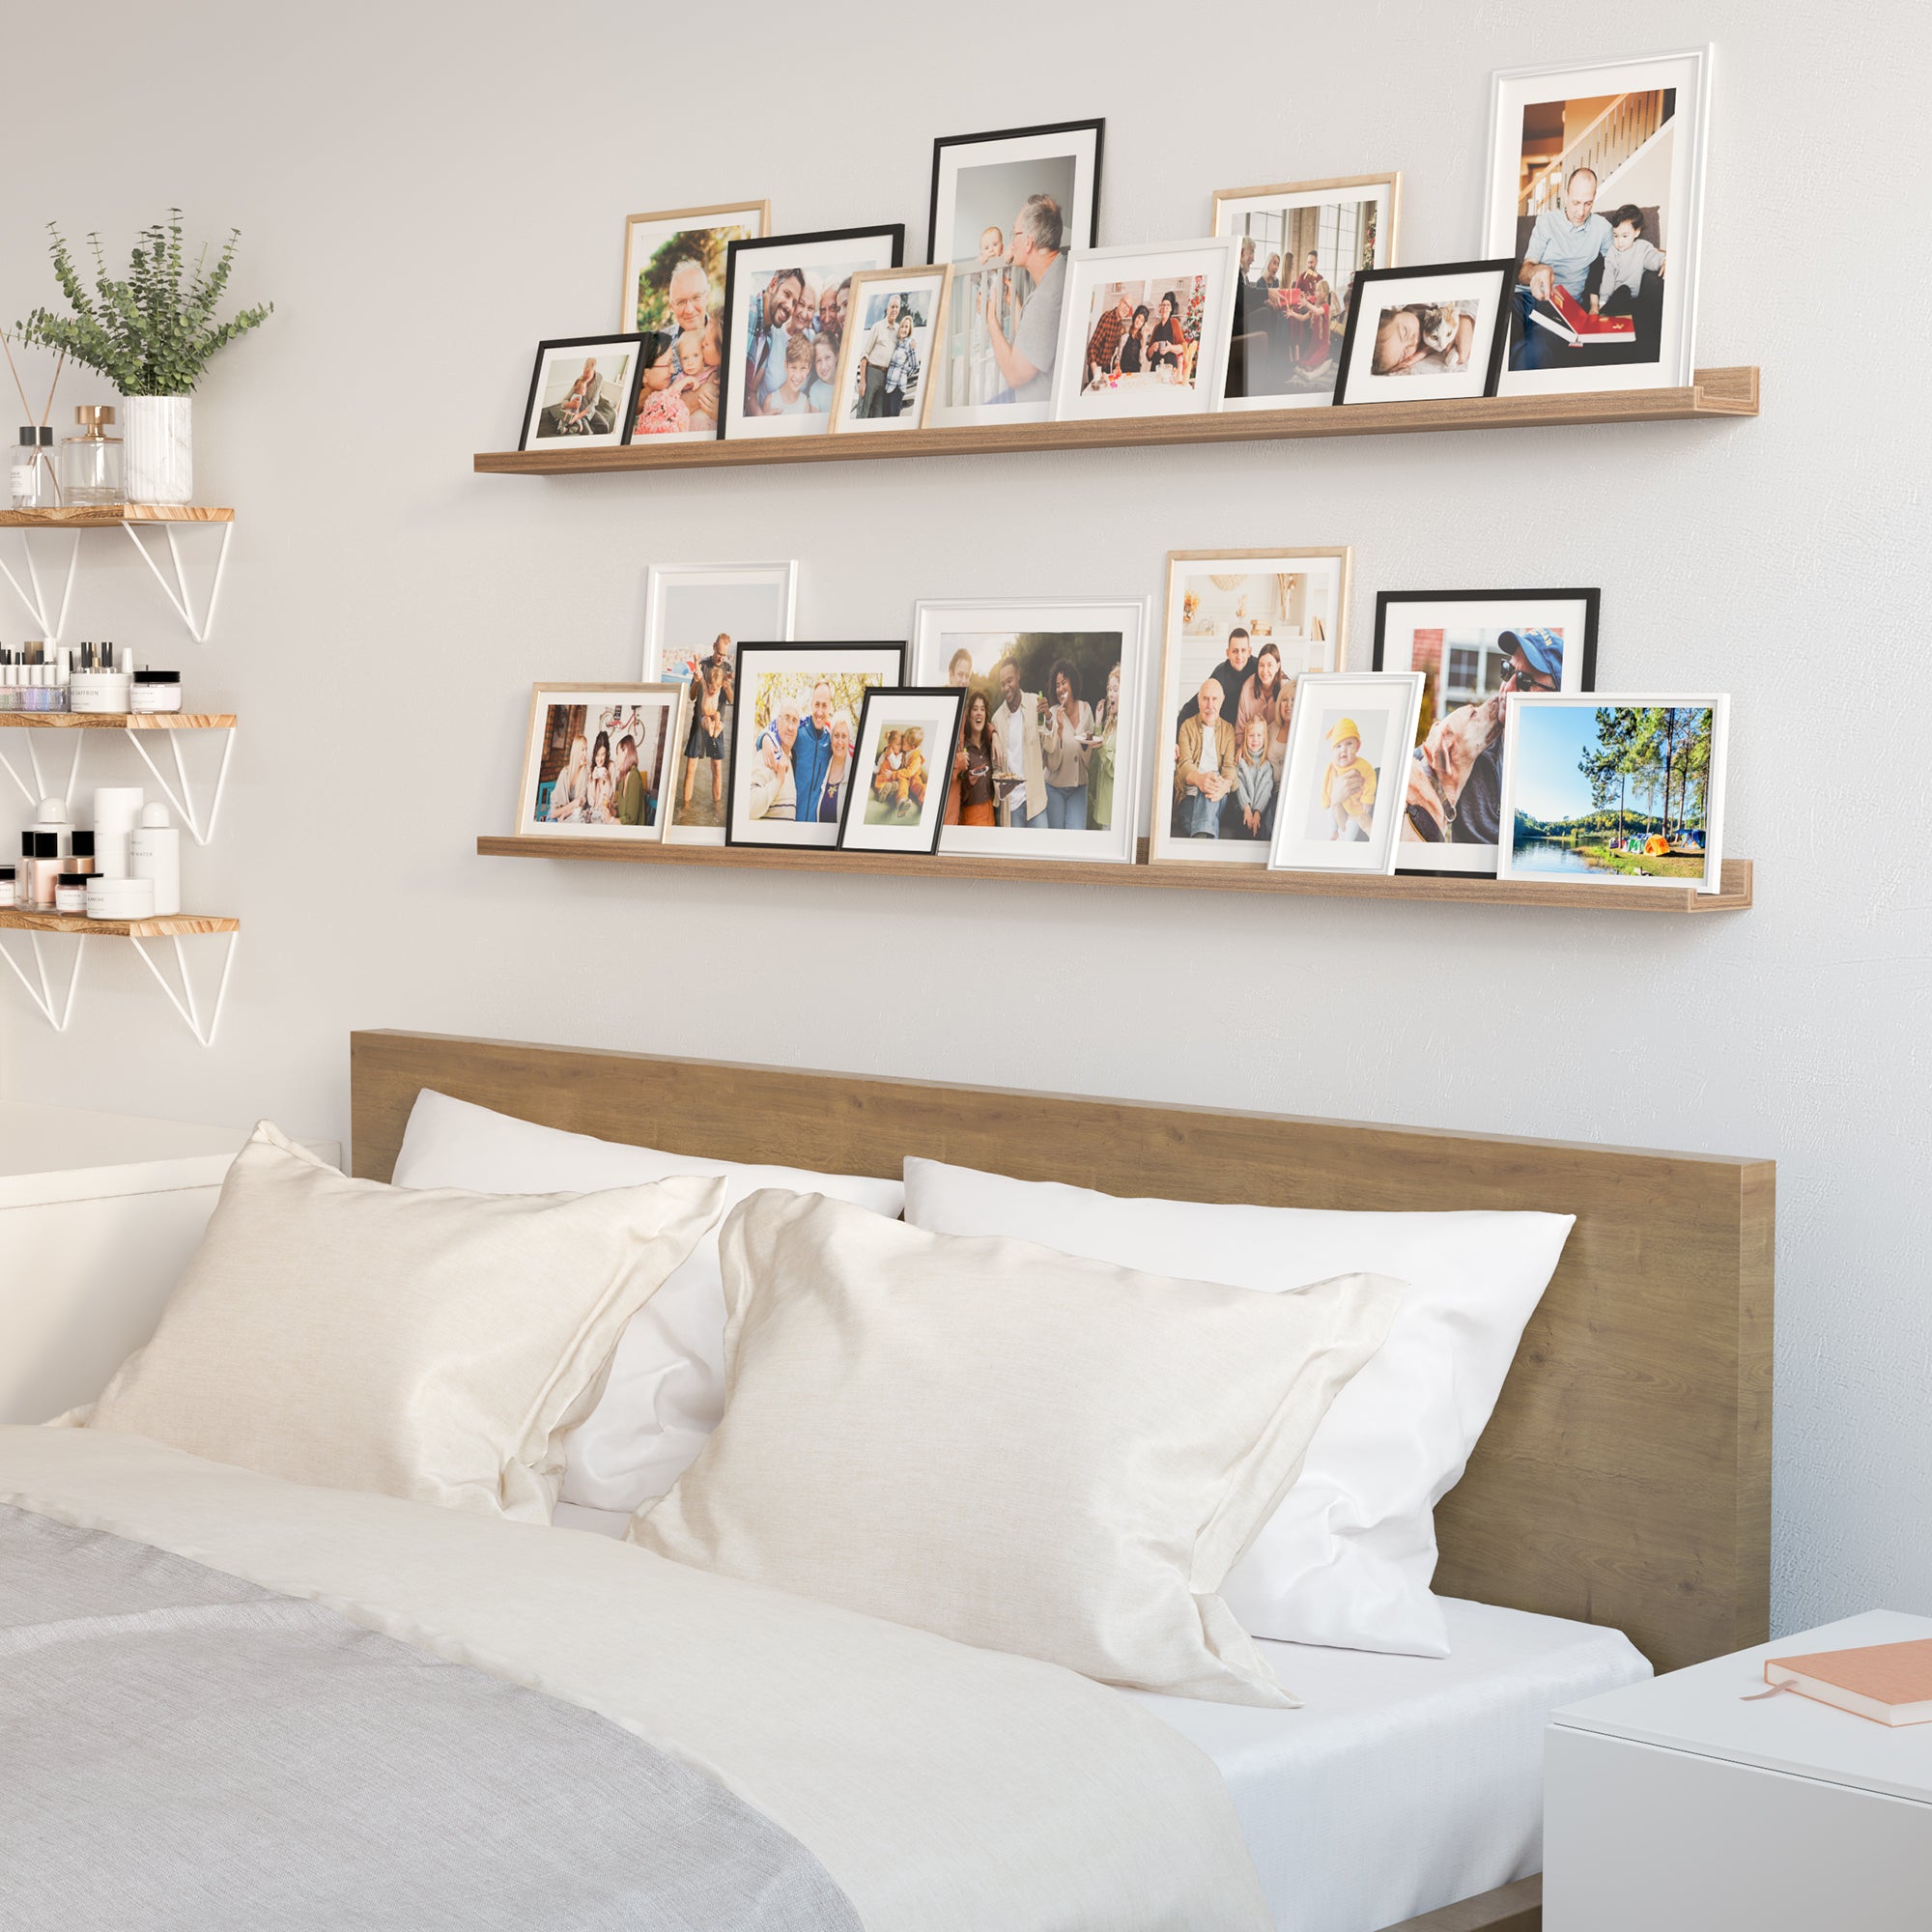 Bedroom with a bed and white linens, with wall shelves above displaying a variety of framed family photos.